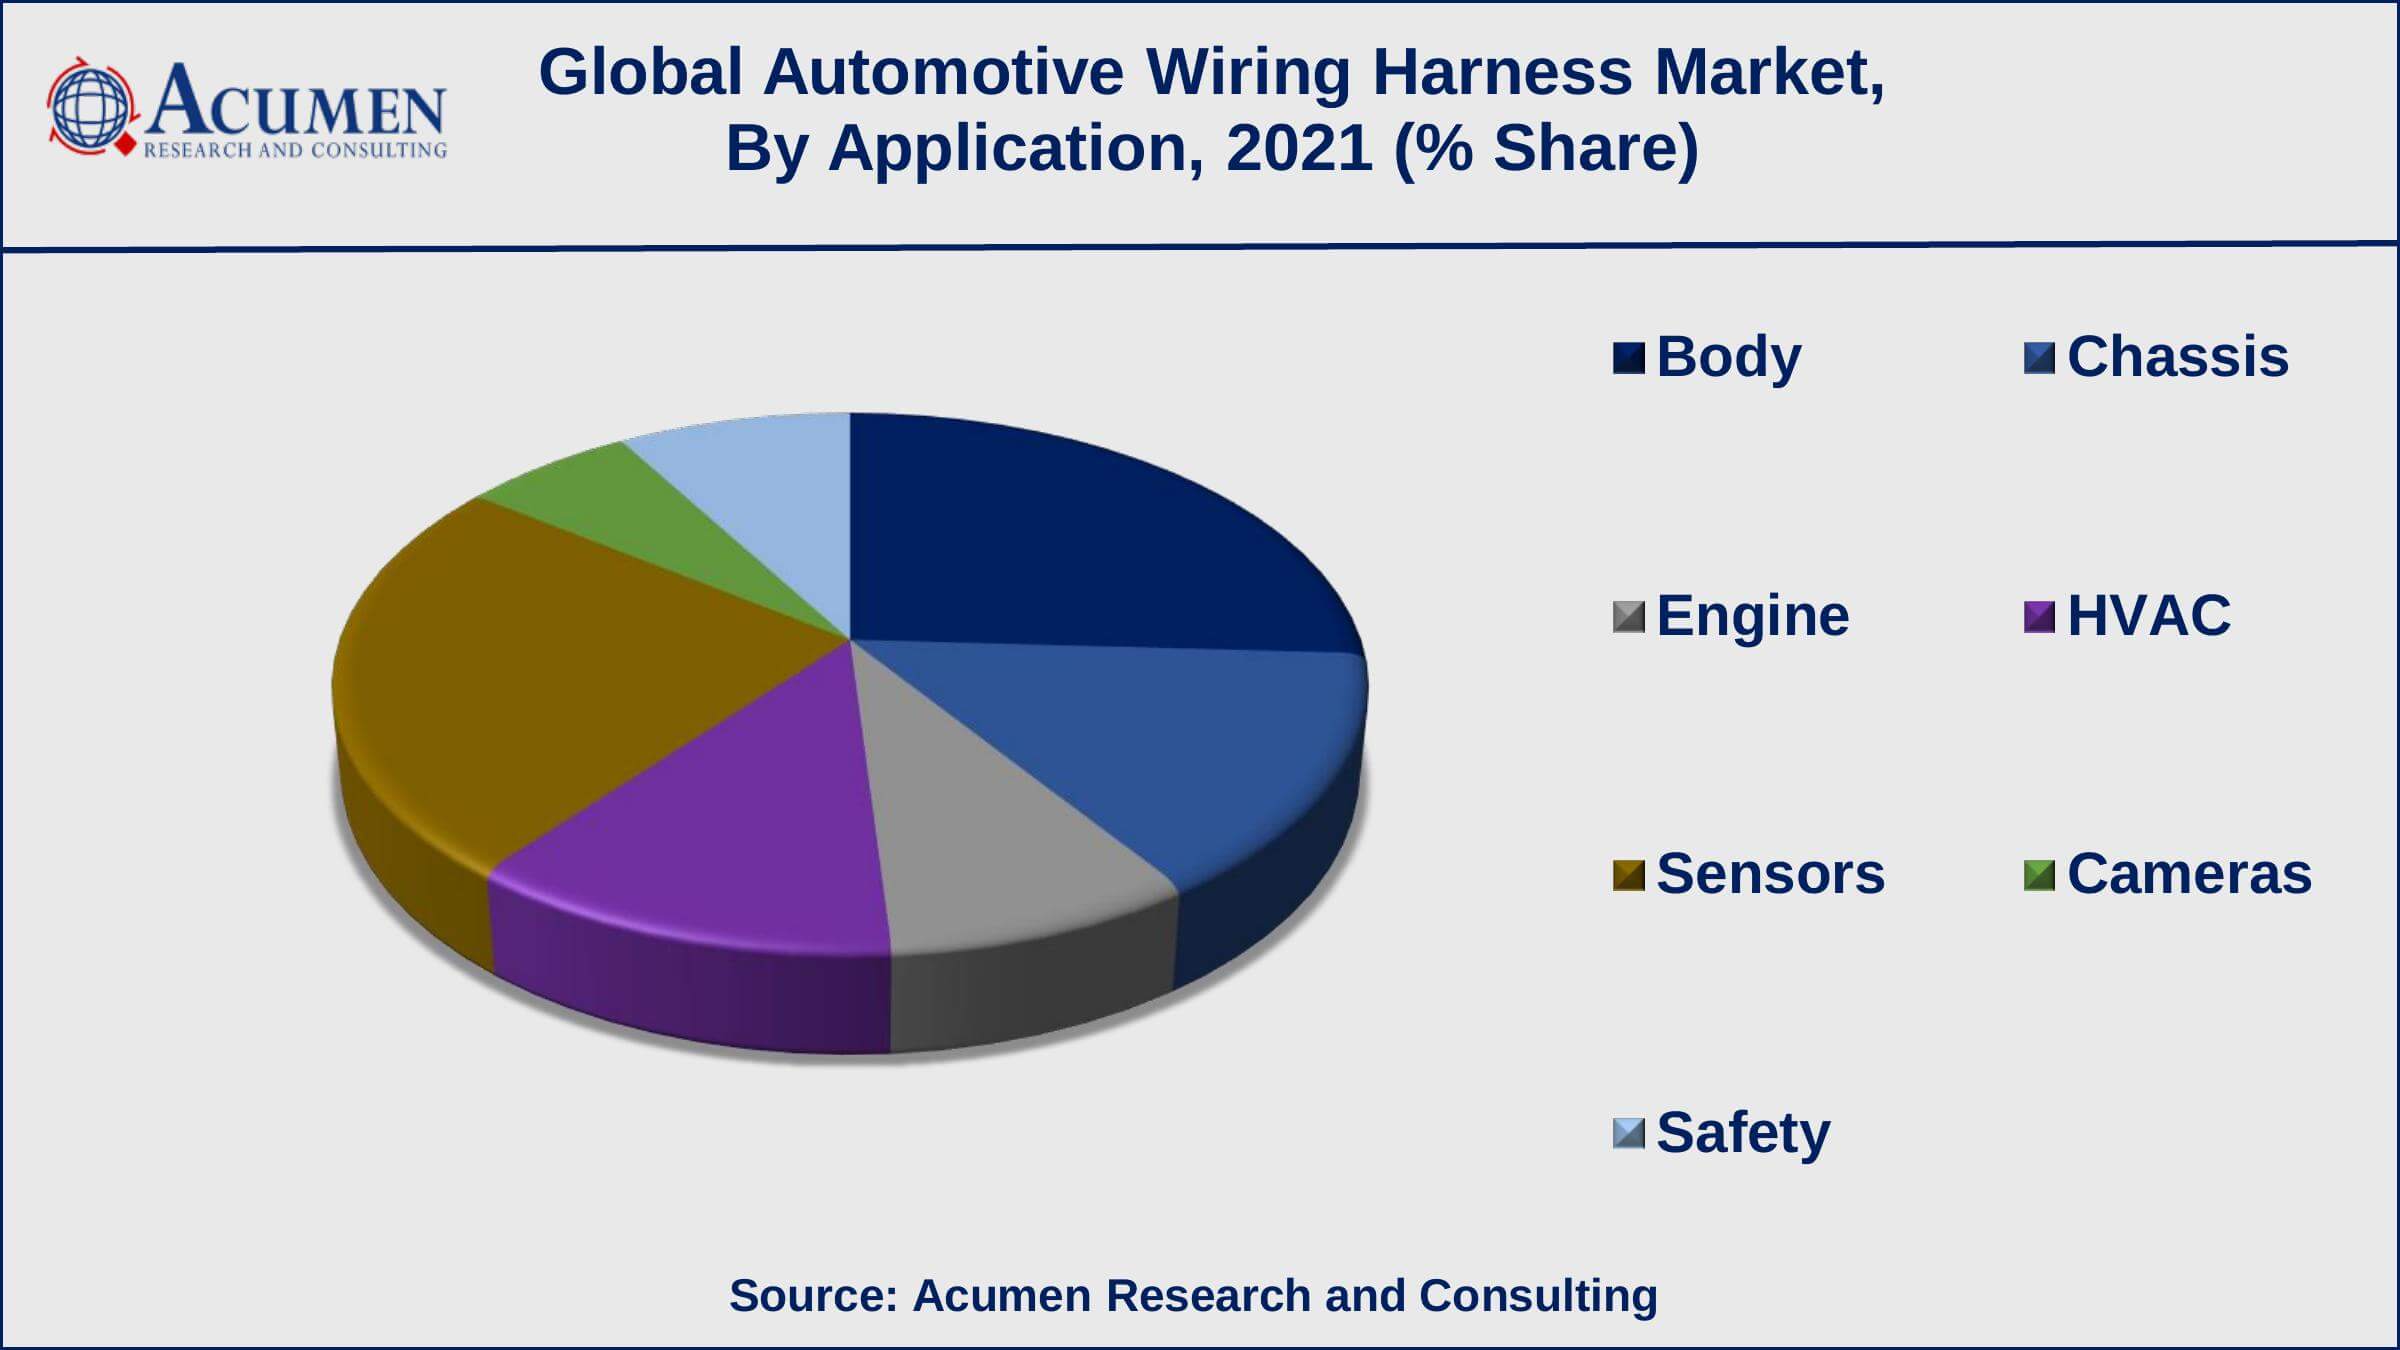 Europe automotive wiring harness market growth will record substantial CAGR of over 6% from 2022 to 2030